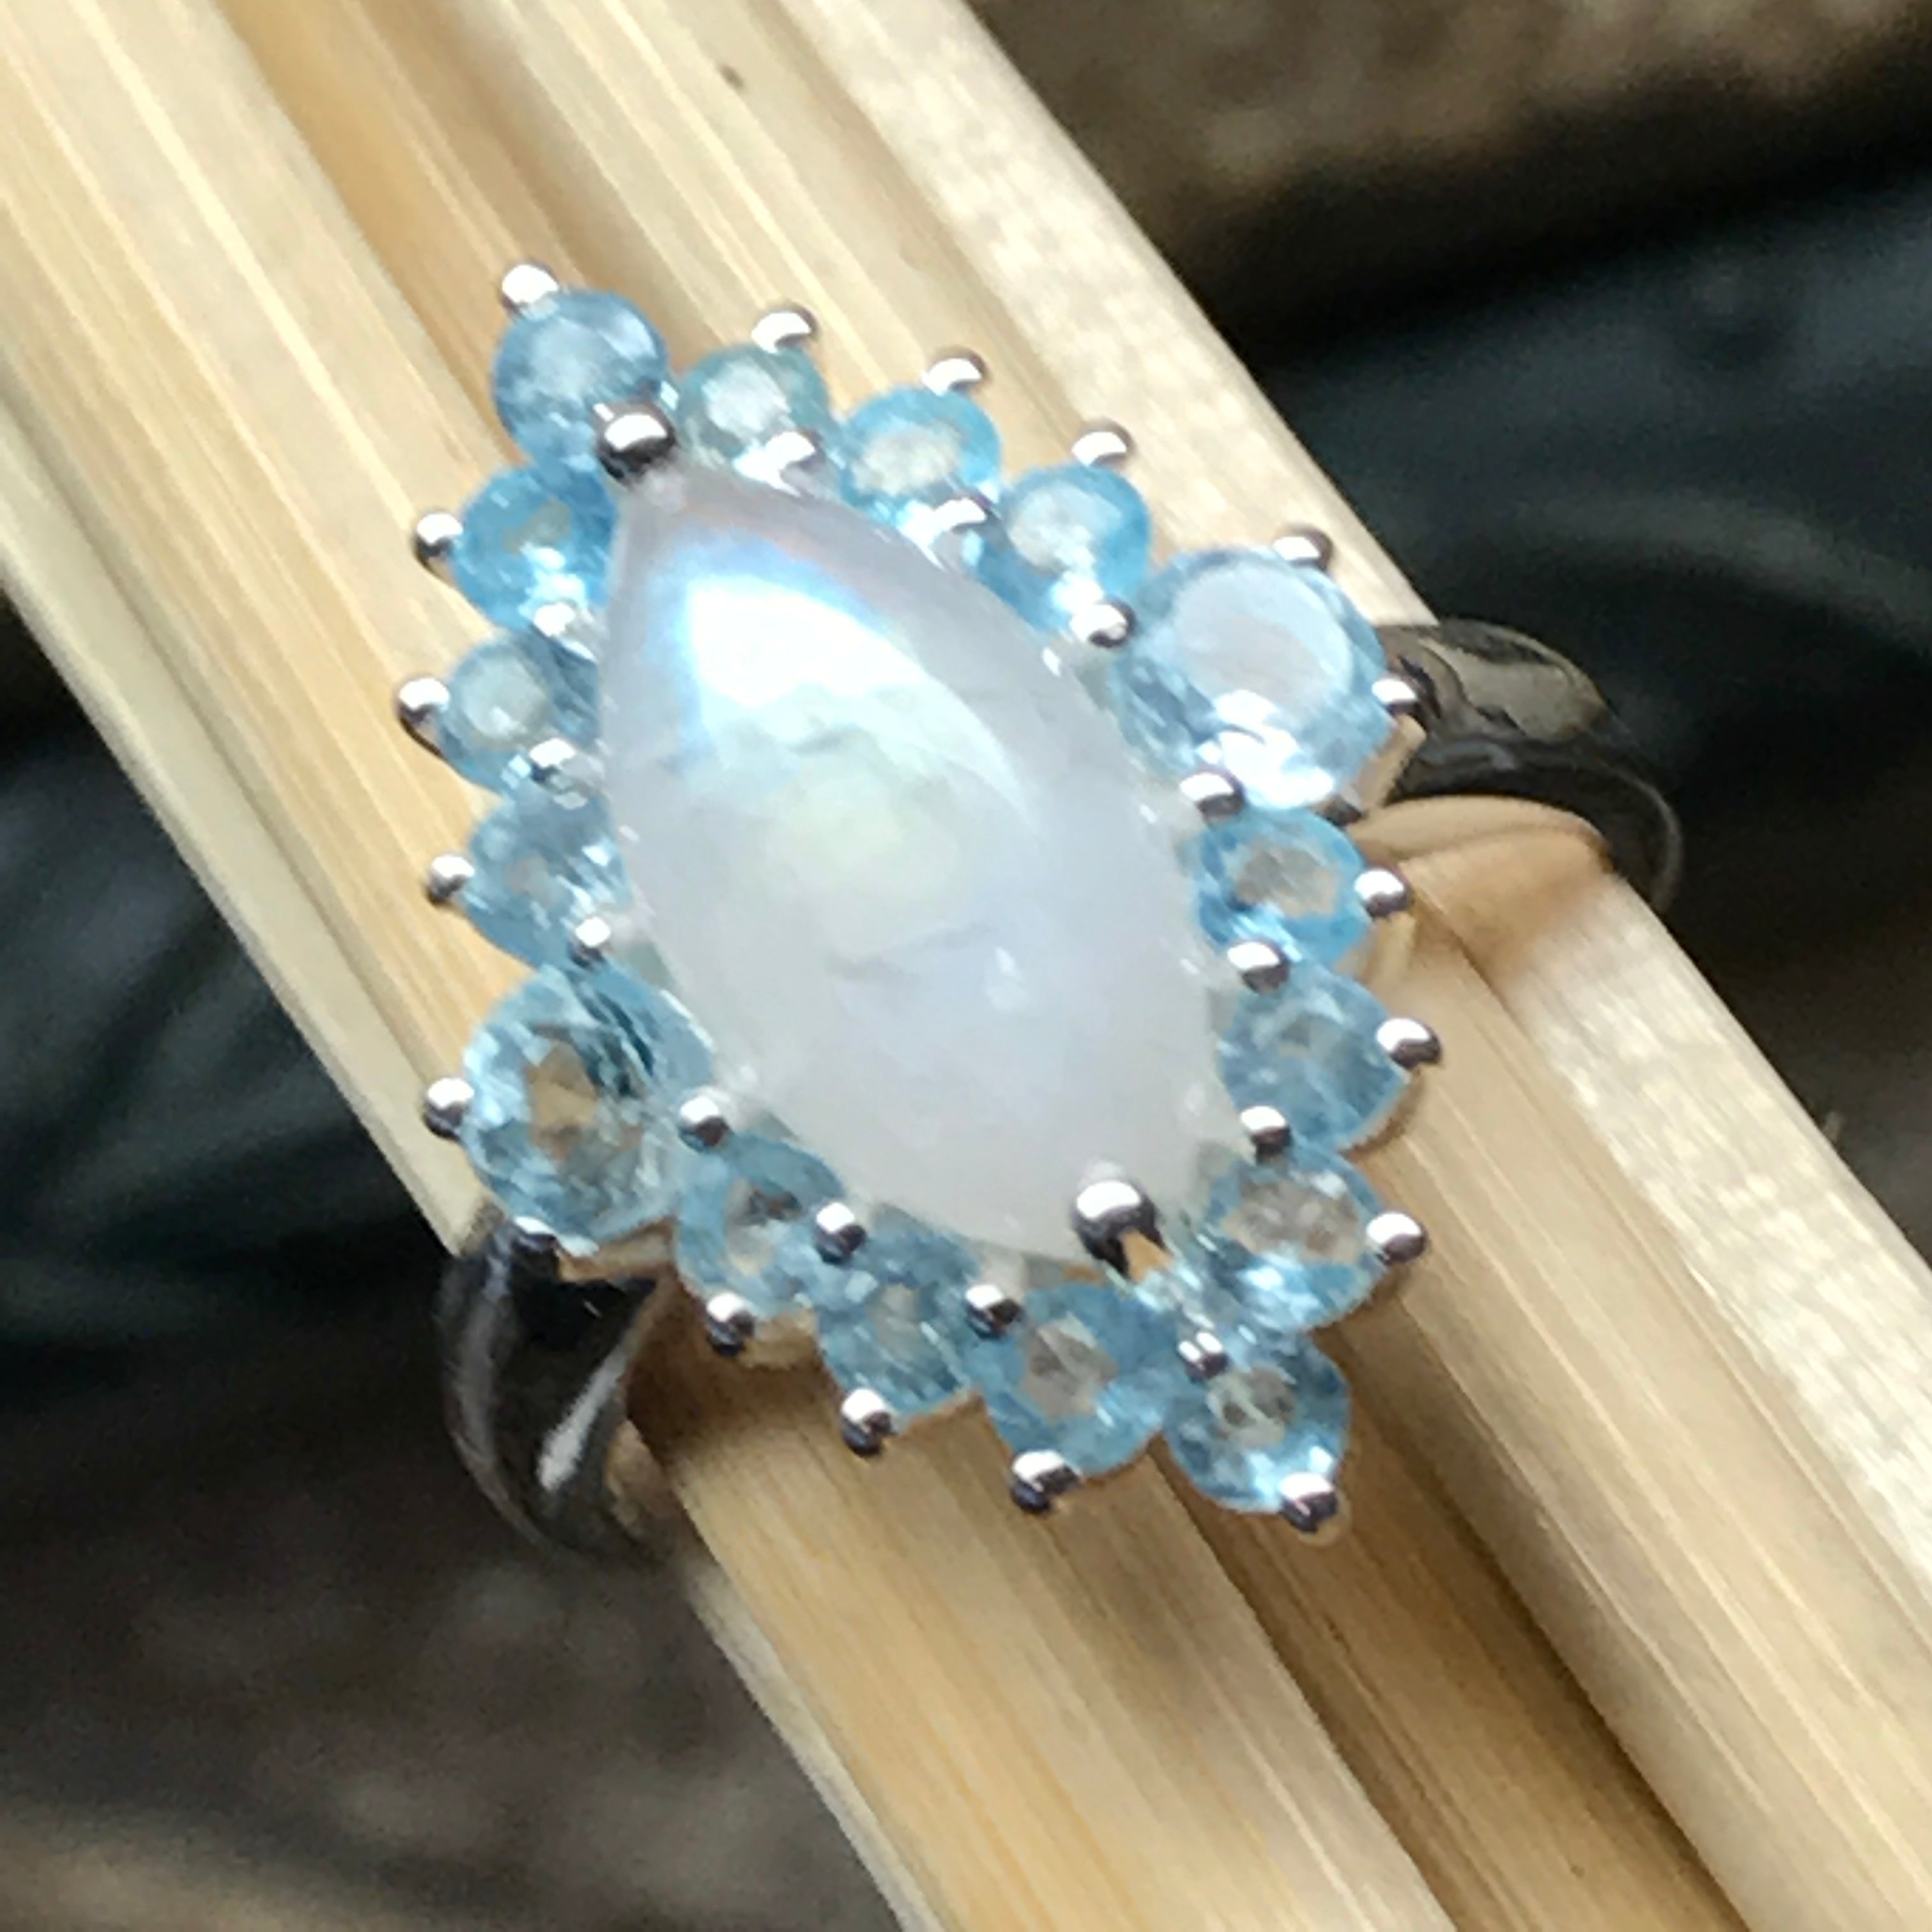 Genuine 6ct Blue Topaz, Rainbow Moonstone 925 Solid Sterling Silver Ring Size 6, 7, 8, 9 - Natural Rocks by Kala